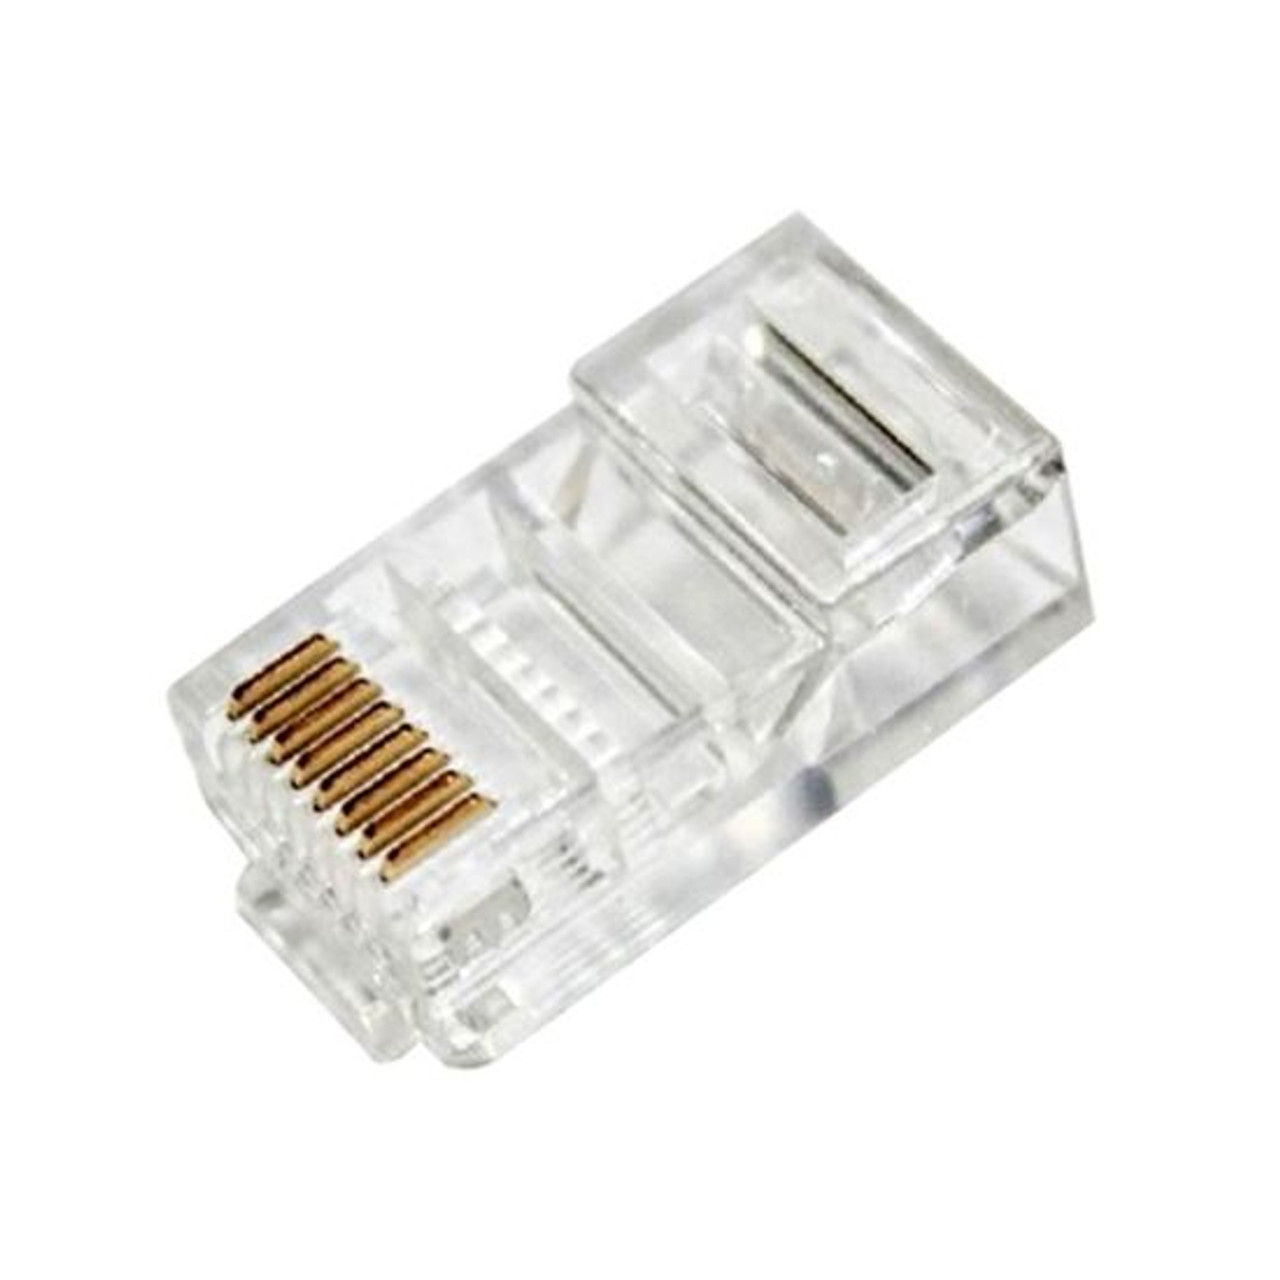 Eagle CAT5E Connector Plug Round Solid RJ45 Gold Plate 50 Micron Contacts Modular 8P8C 1 Pack Male Network Single 8 Pin Network Computer Ethernet Data Telephone Line Plug